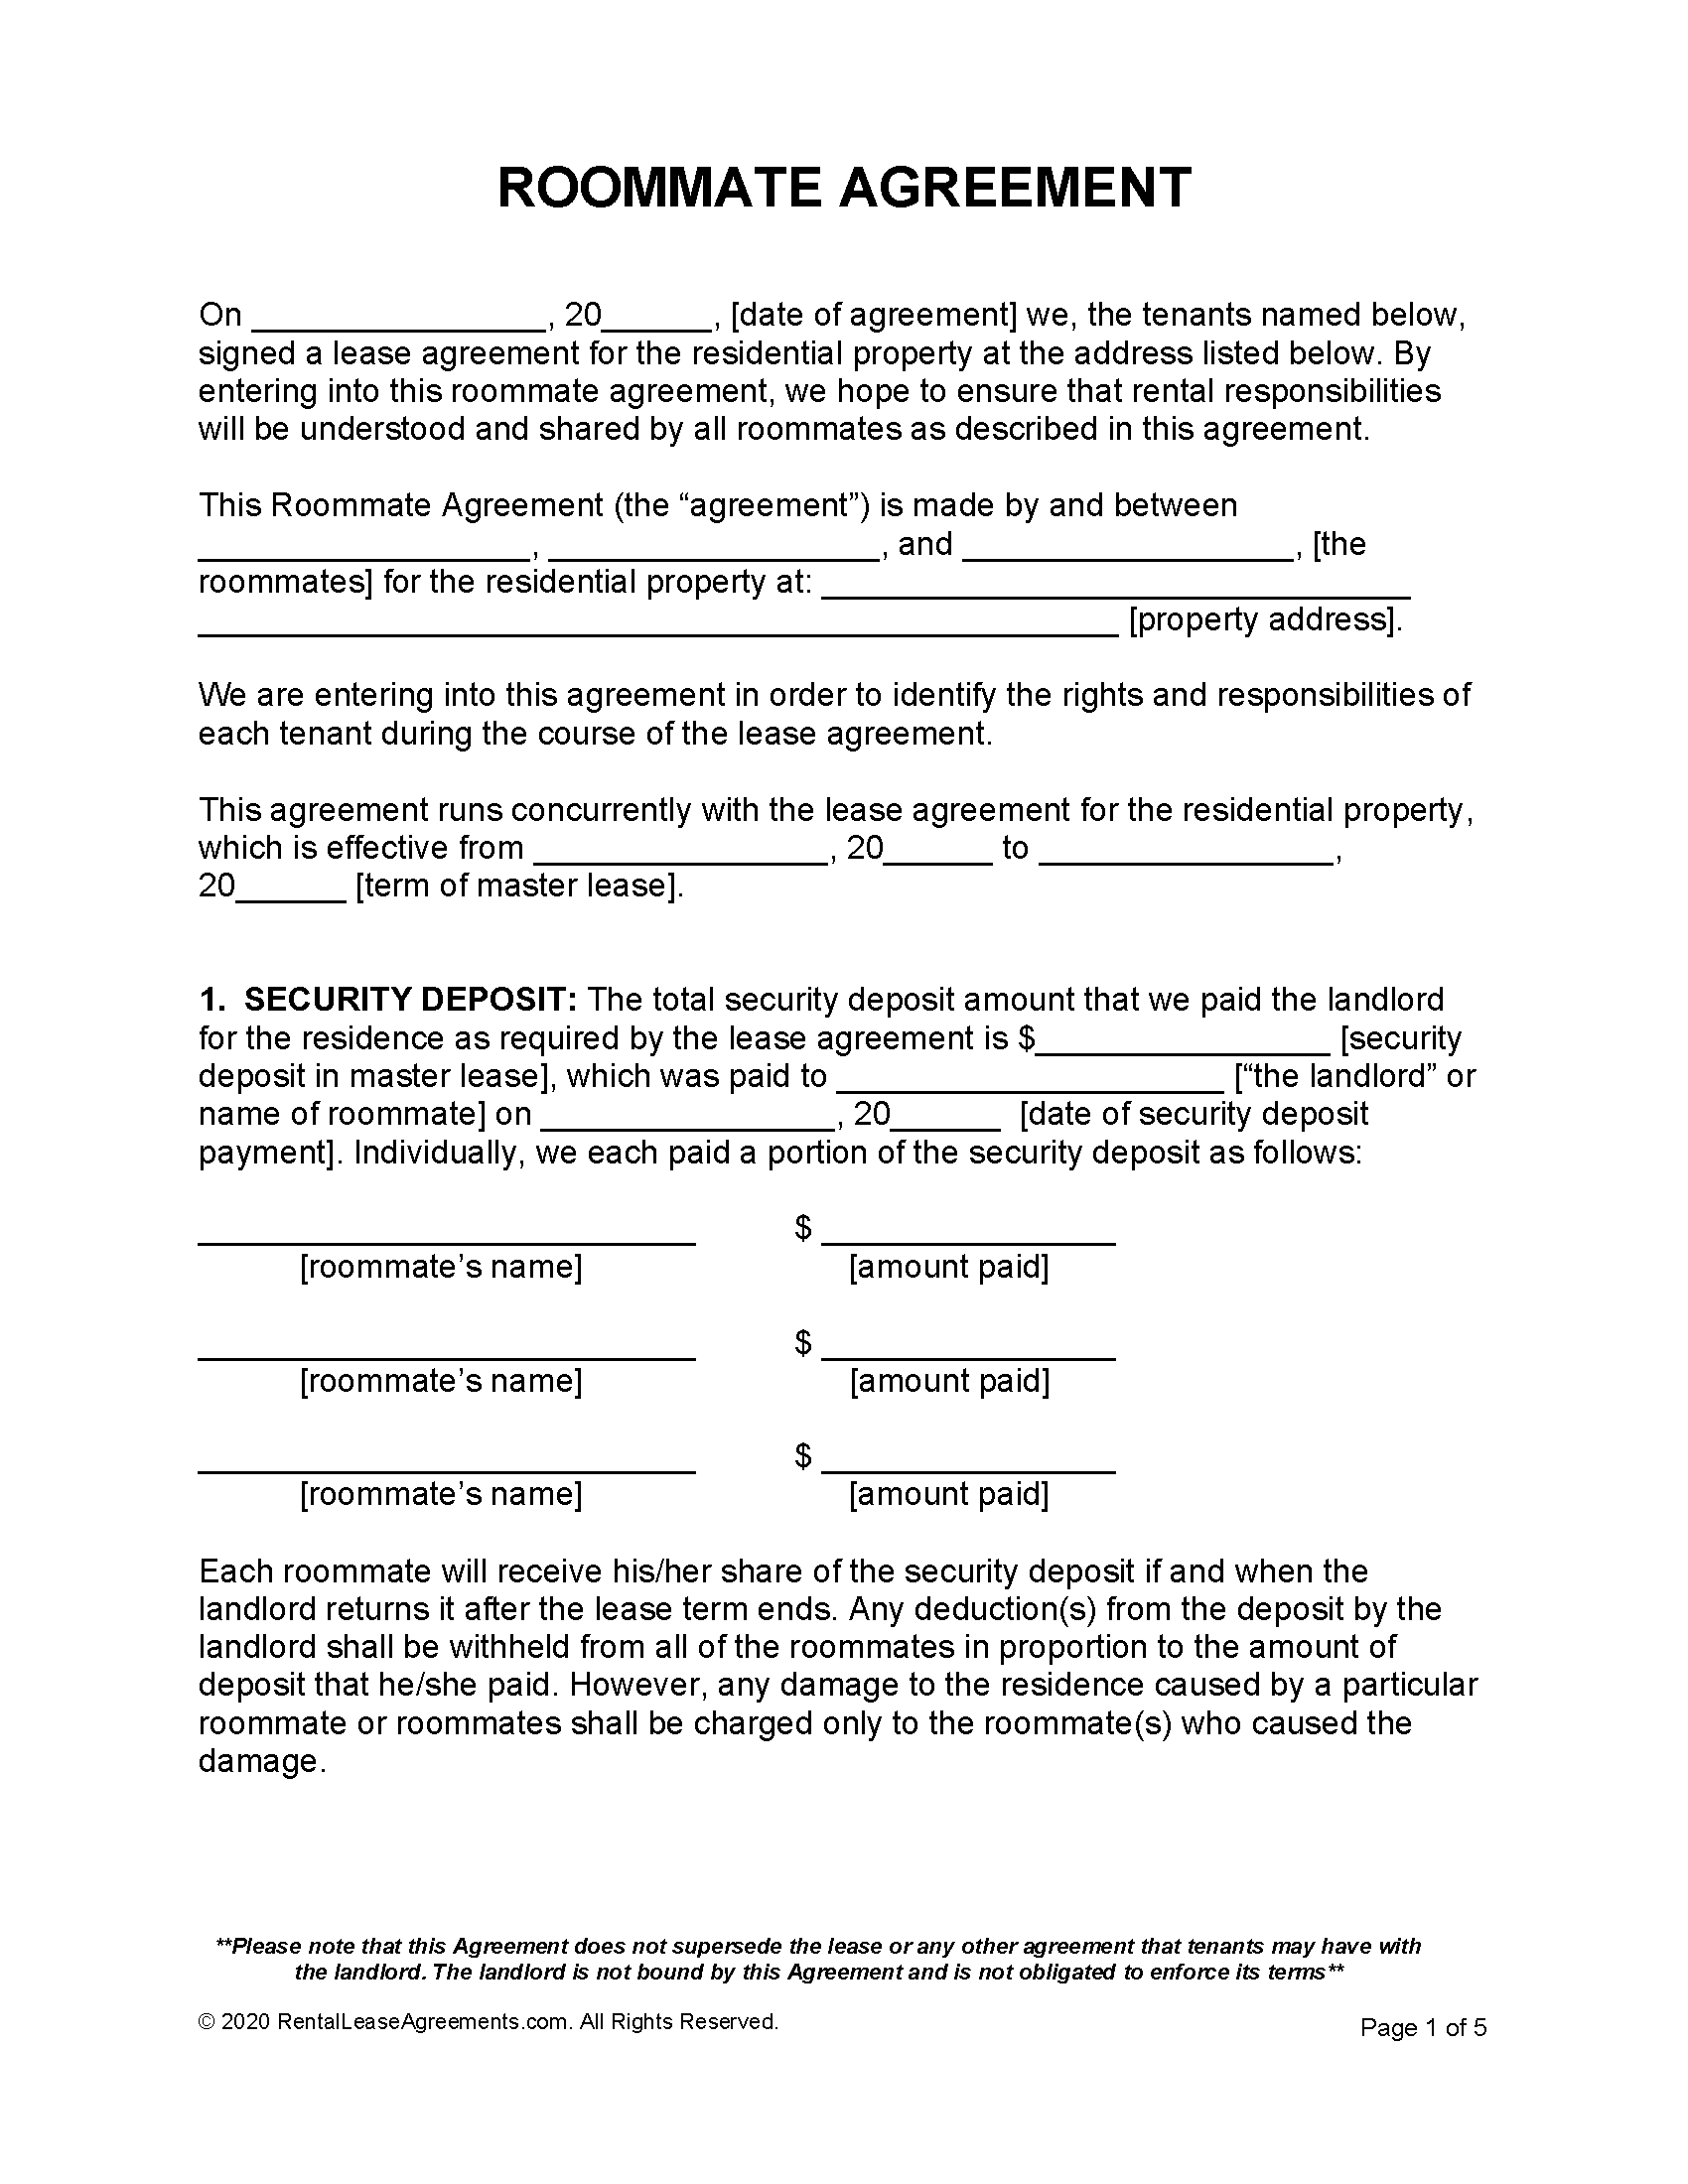 Free Roommate Agreement Template  PDF – Word Within Security Deposit Agreement Between Roommates